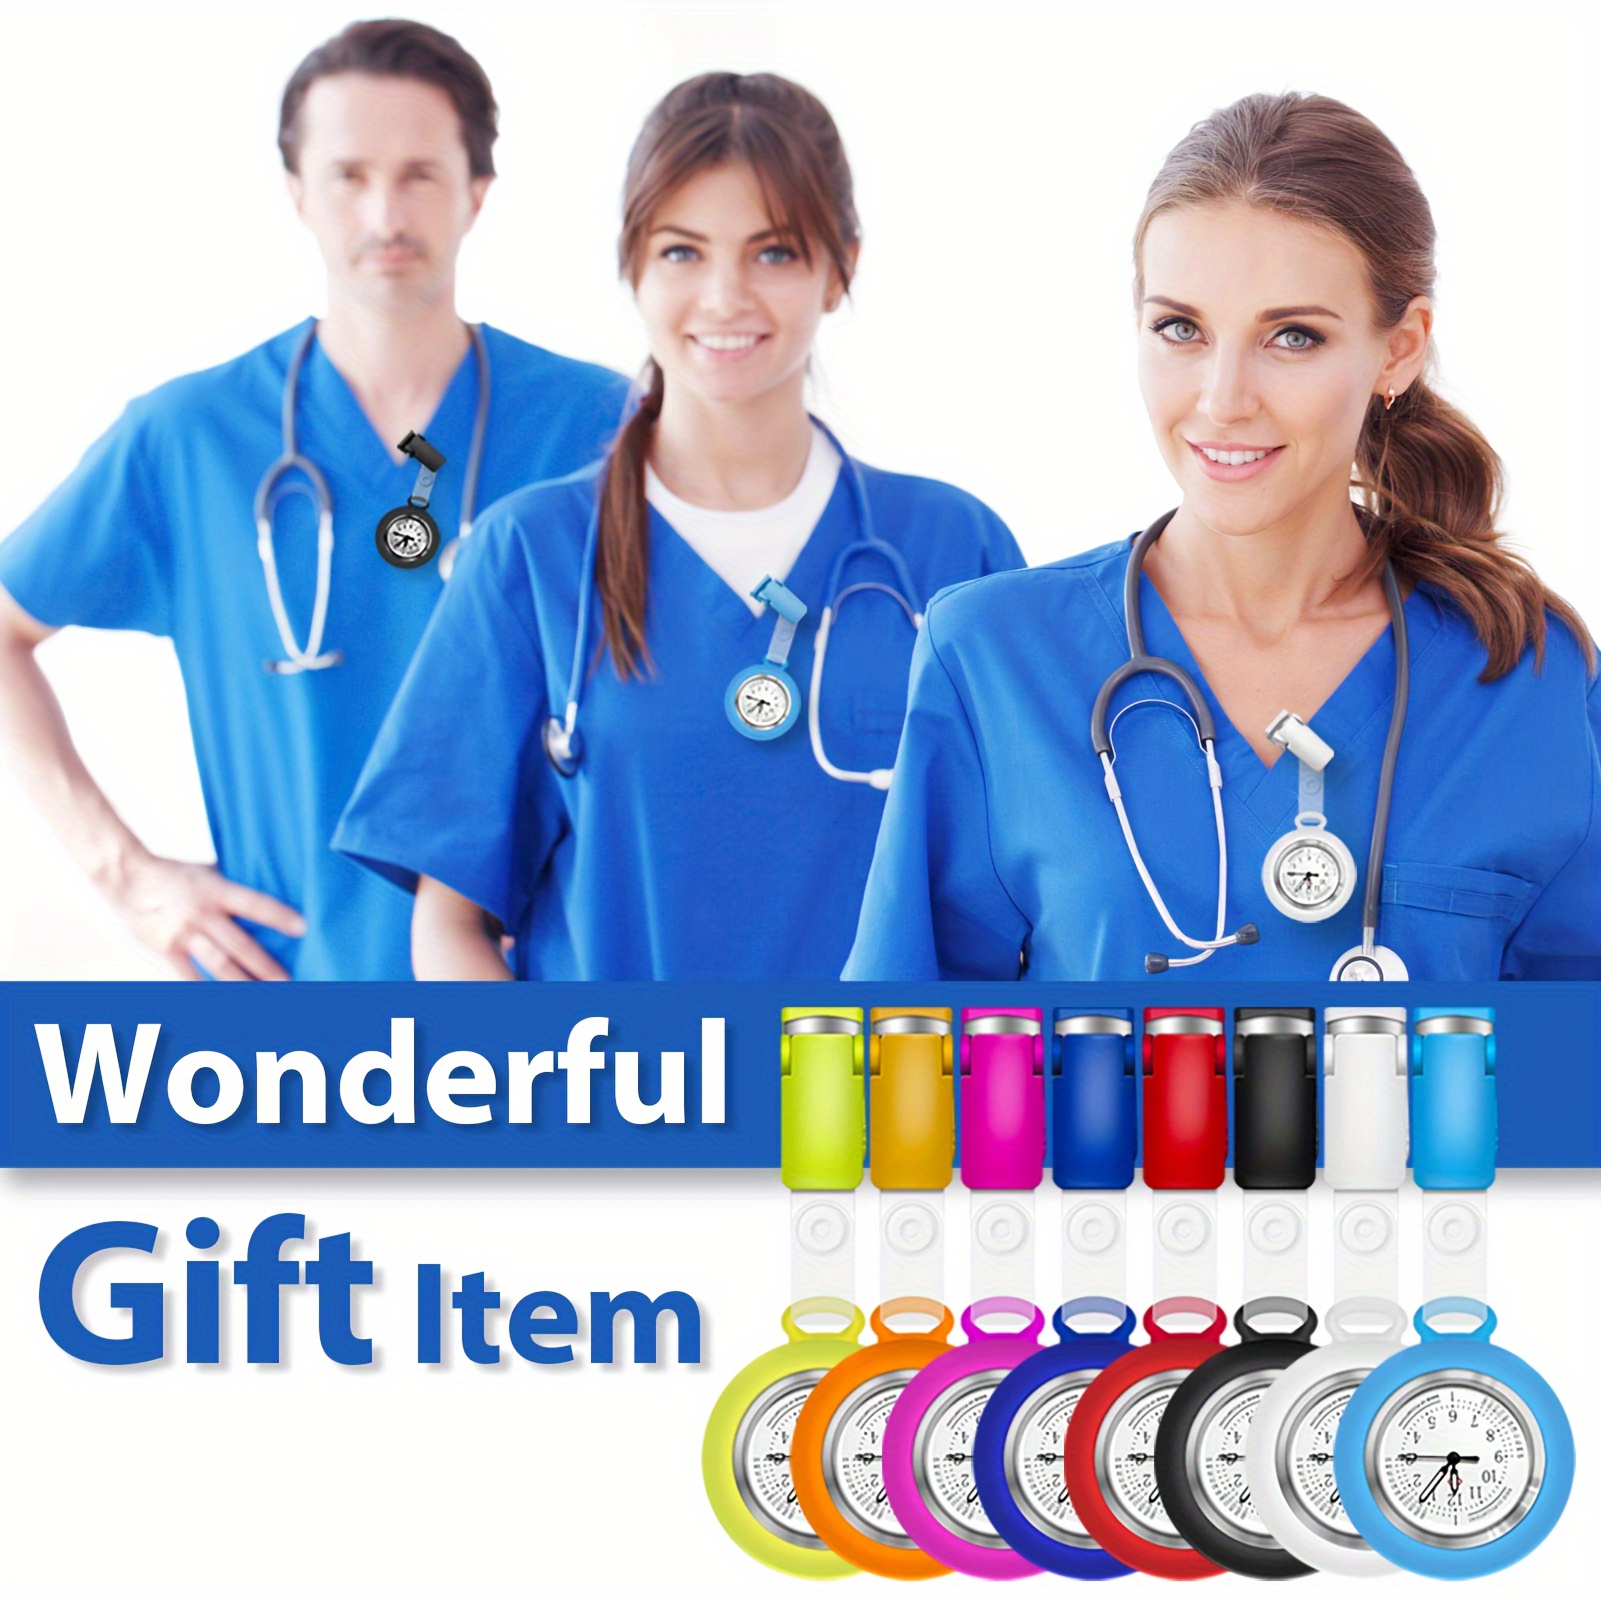 womens nursing watch watch with second hand clip medical brooch watch for nurse and doctor ideal choice for gifts 3